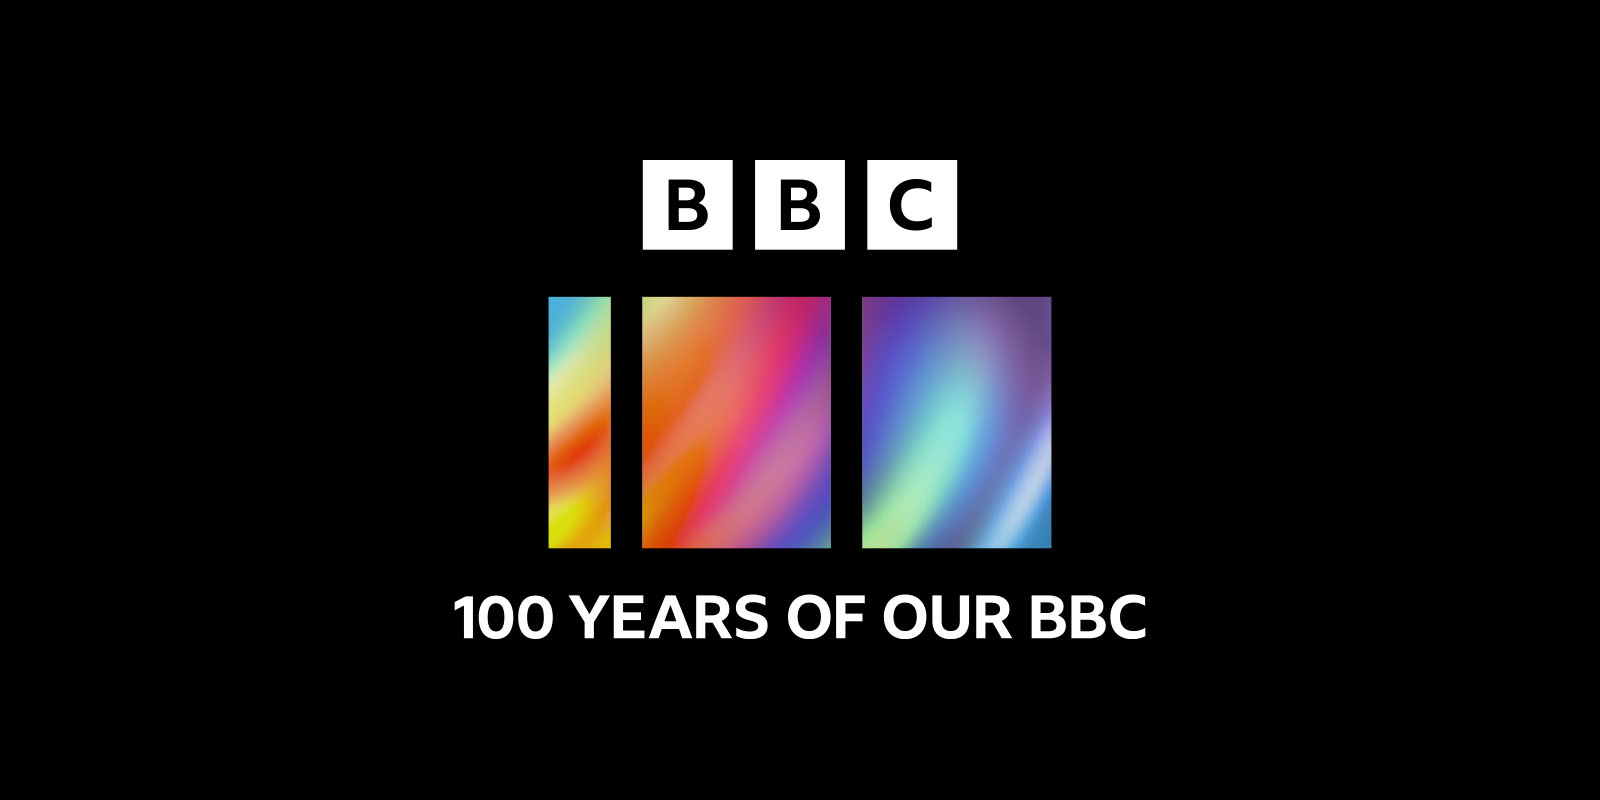 The BBC: Informing, Educating and Entertaining for 100 Years